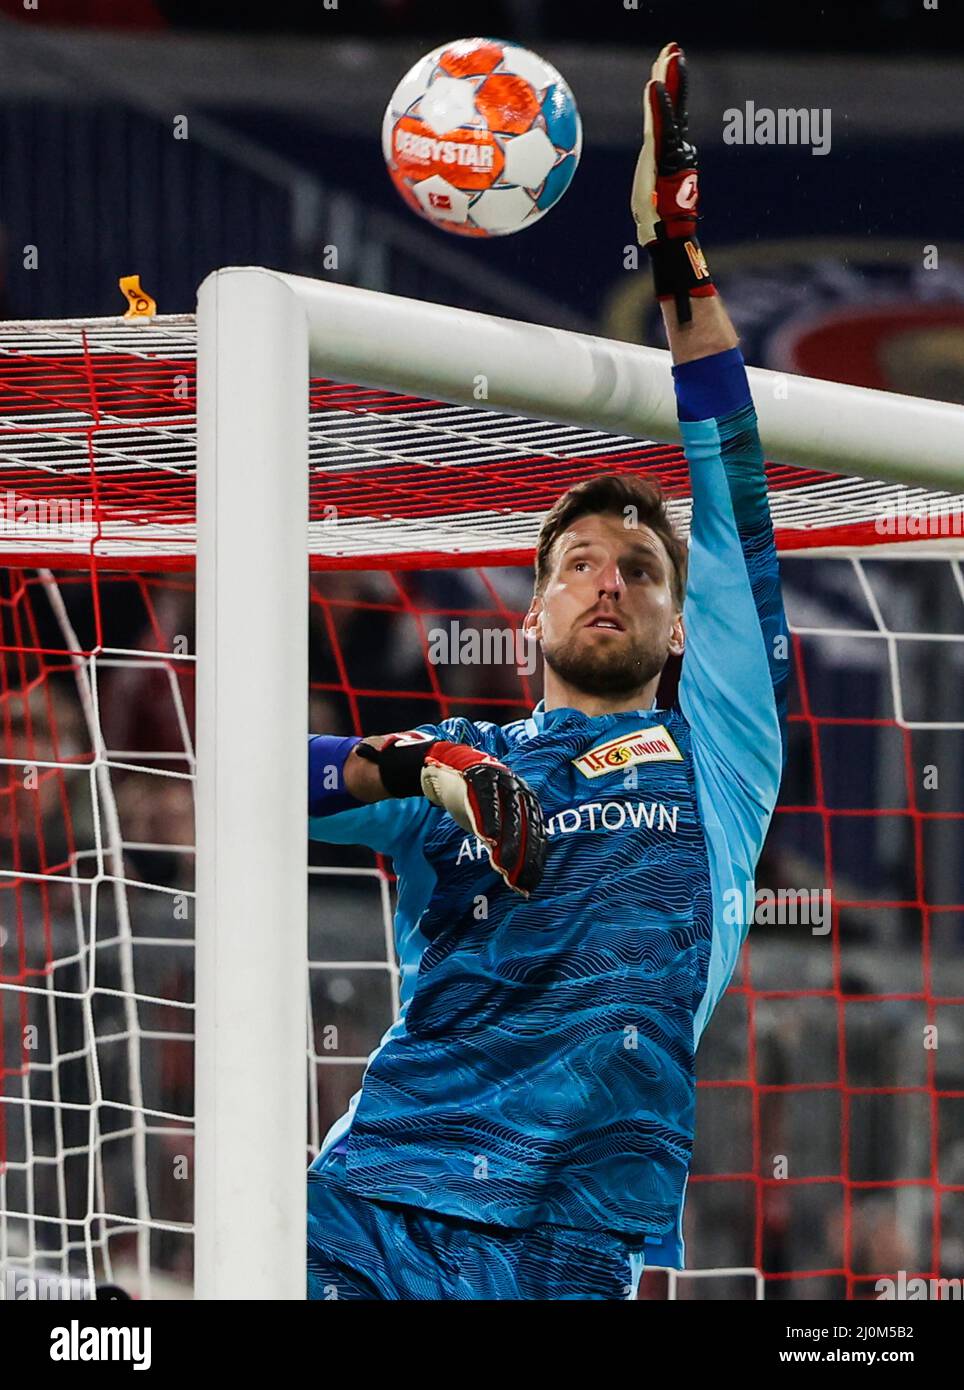 Munich, Germany. 19th Mar, 2022. Goalkeeper Andreas Luthe of Union Berlin makes a save during a German Bundesliga match between Bayern Munich and 1.FC Union Berlin in Munich, Germany, March 19, 2022. Credit: Philippe Ruiz/Xinhua/Alamy Live News Stock Photo